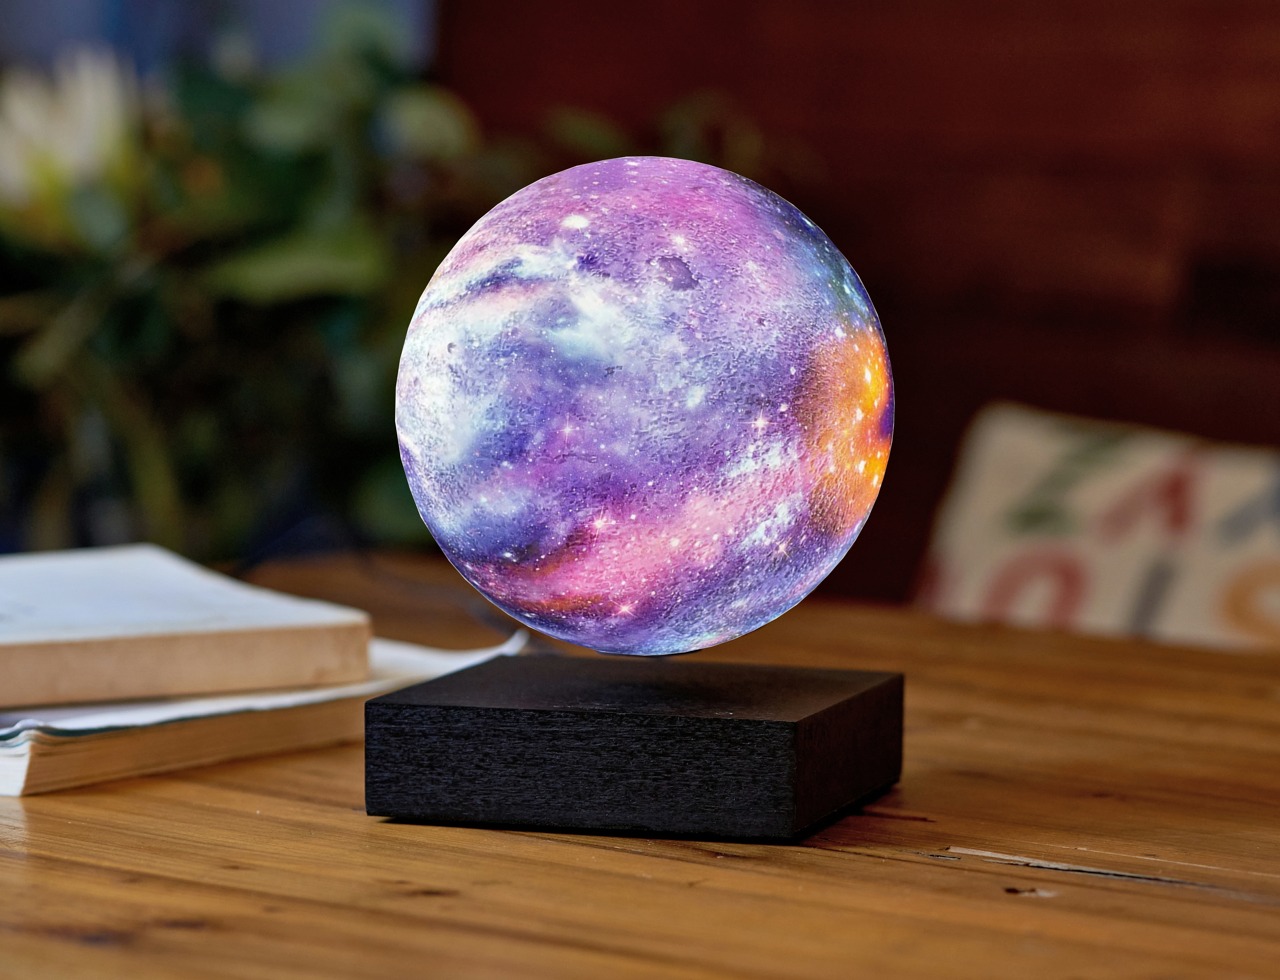 https://www.yankodesign.com/images/design_news/2022/08/smart_lamp_that_encapsulates_the_beauty_of_the_galaxies_3.jpg